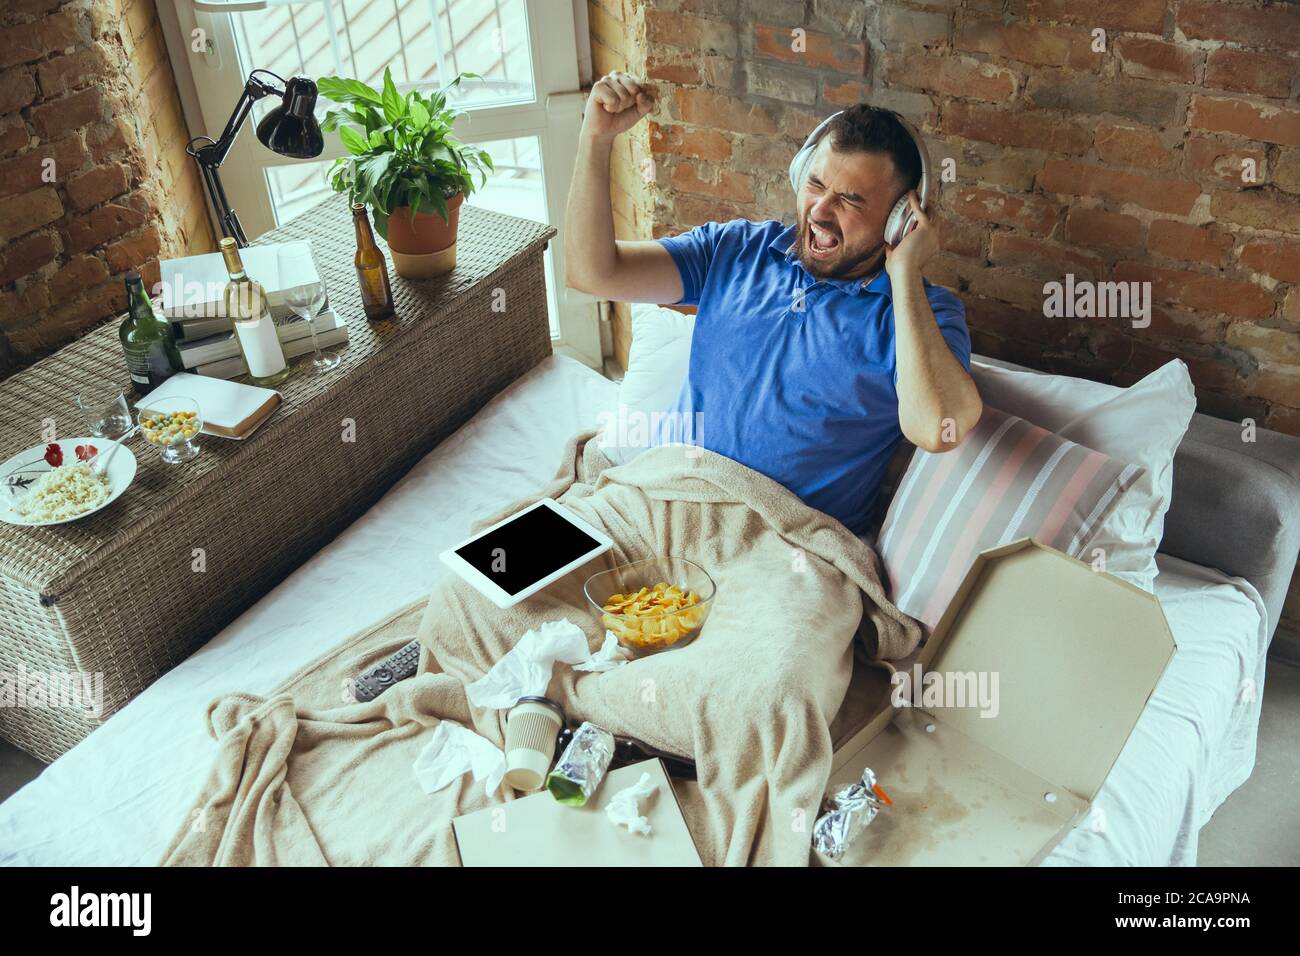 Crazy drive, listening to music and singing. Lazy man living in his bed surrounded with messy. No need to go out to be happy. Using gadgets, watching movie and series, emotional. Fast food. Stock Photo